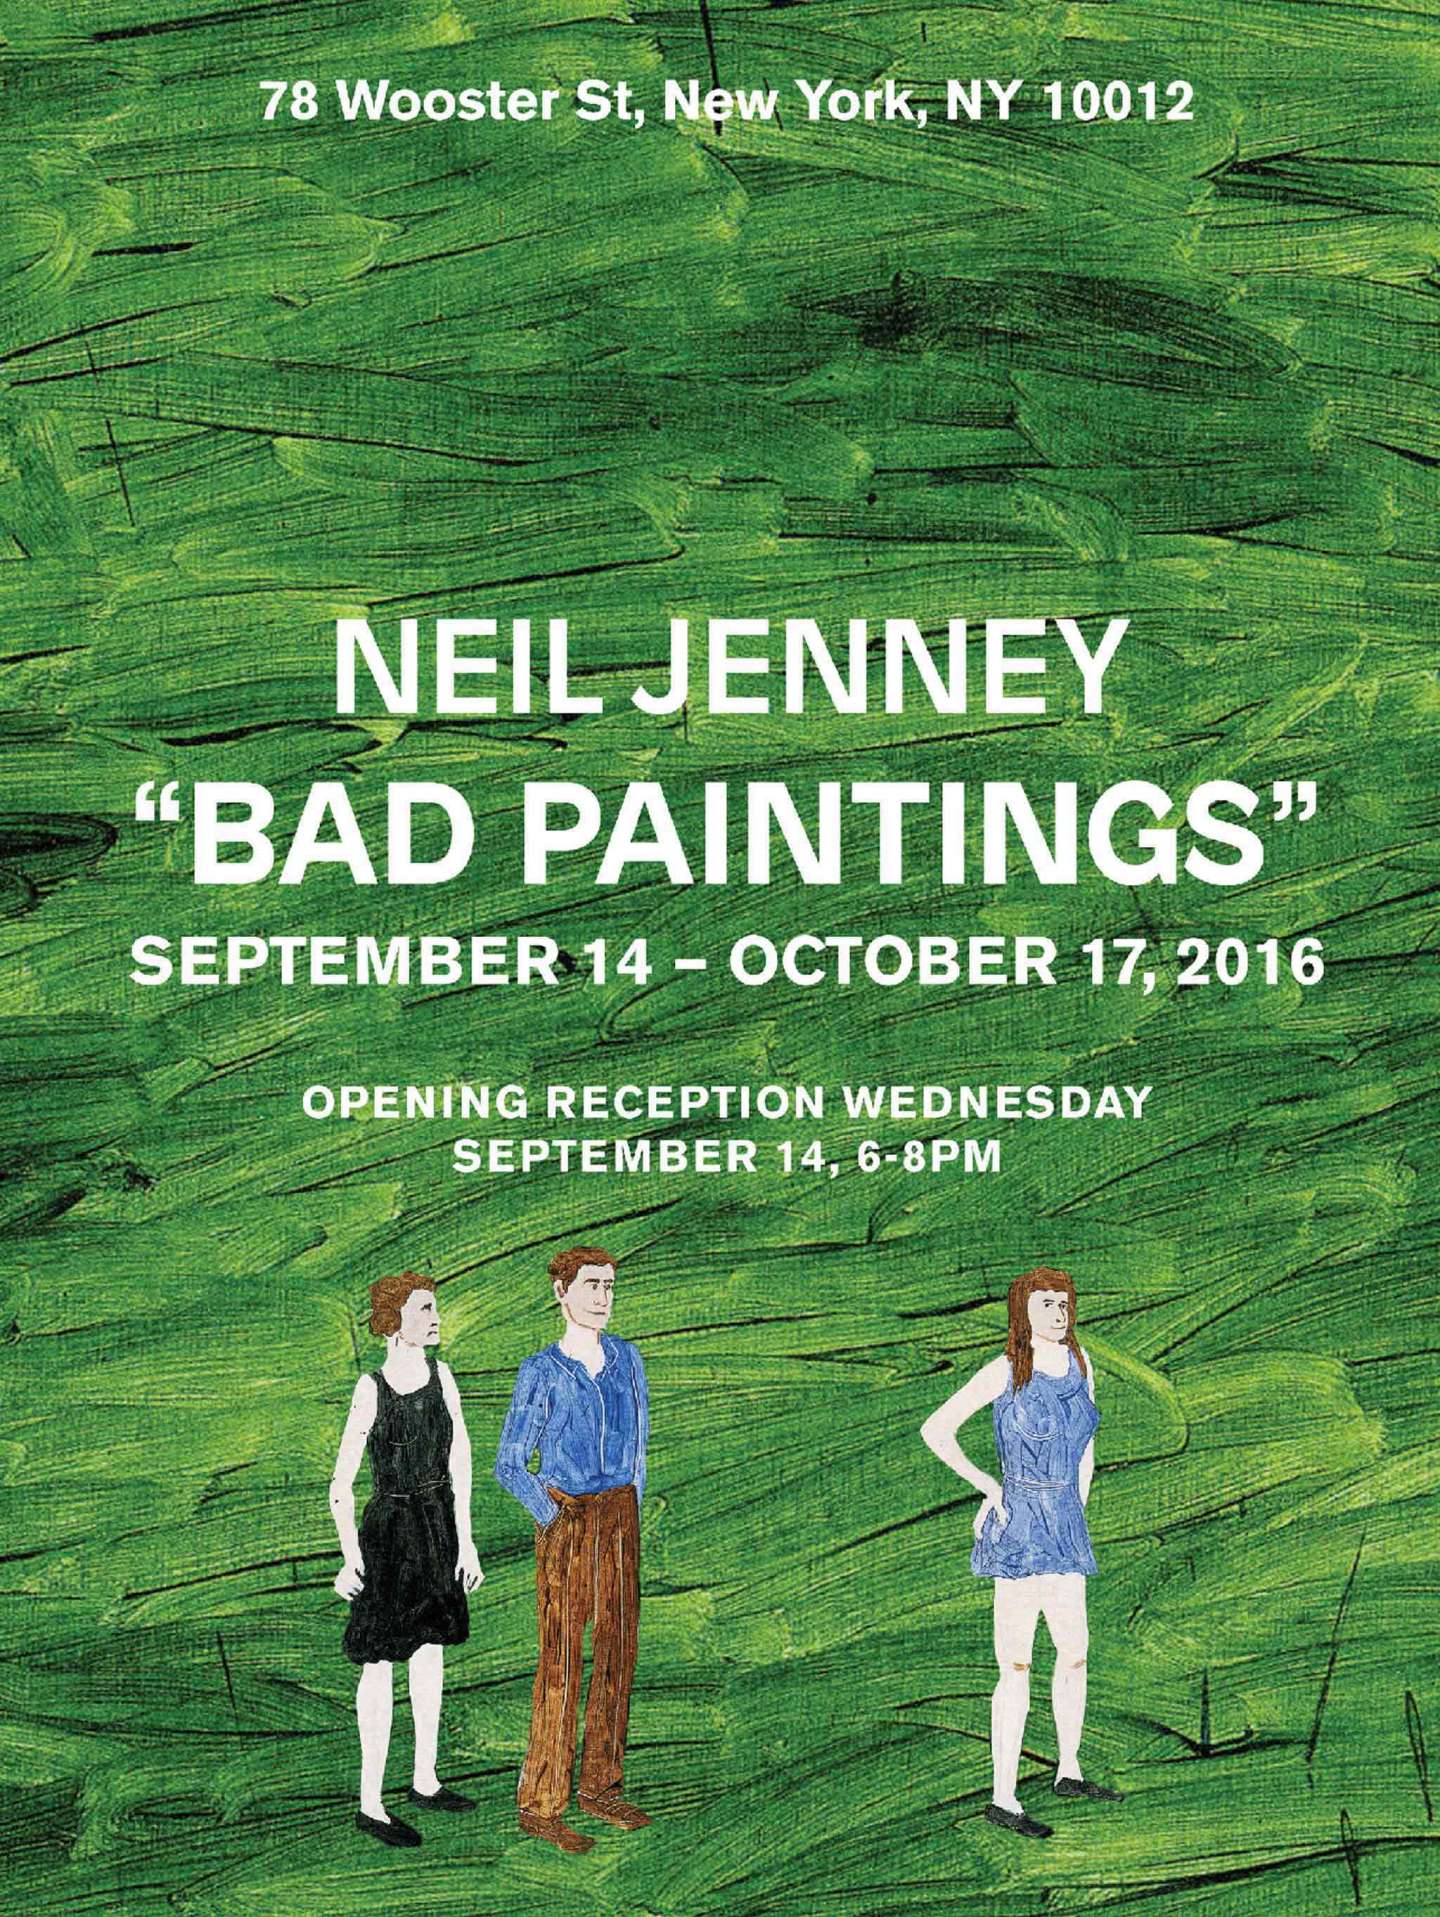 Neil Jenny "Bad Painting" exhibition poster